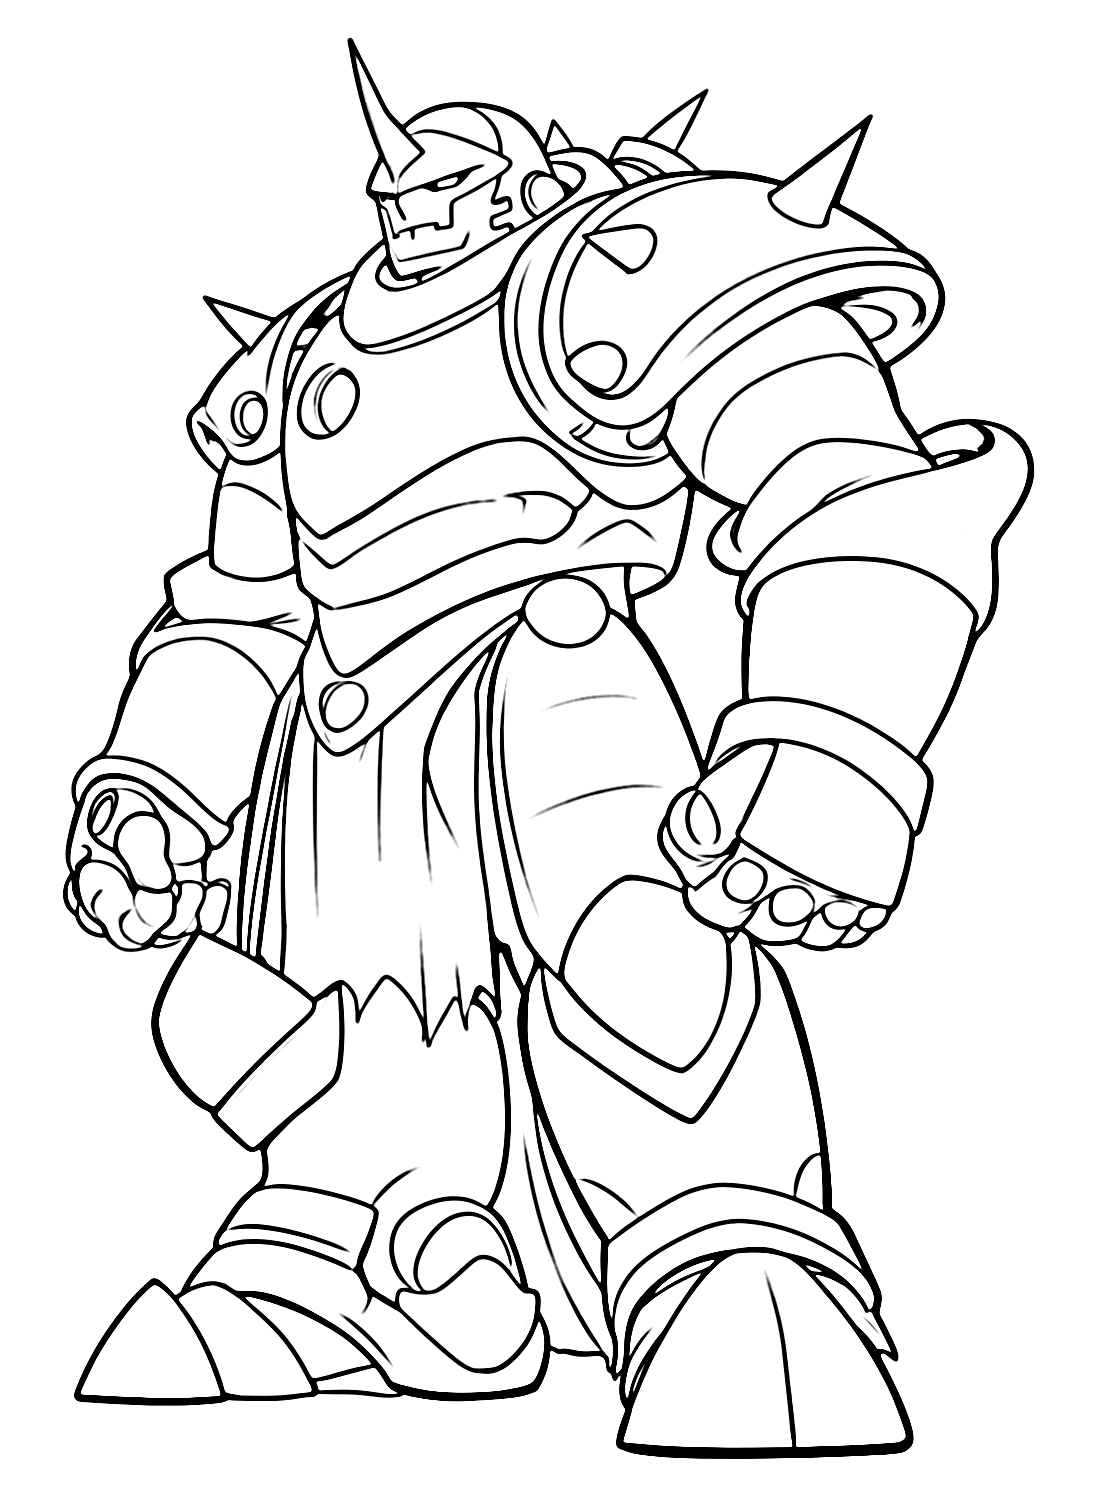 Alphonse in Fullmetal Armor Coloring Page